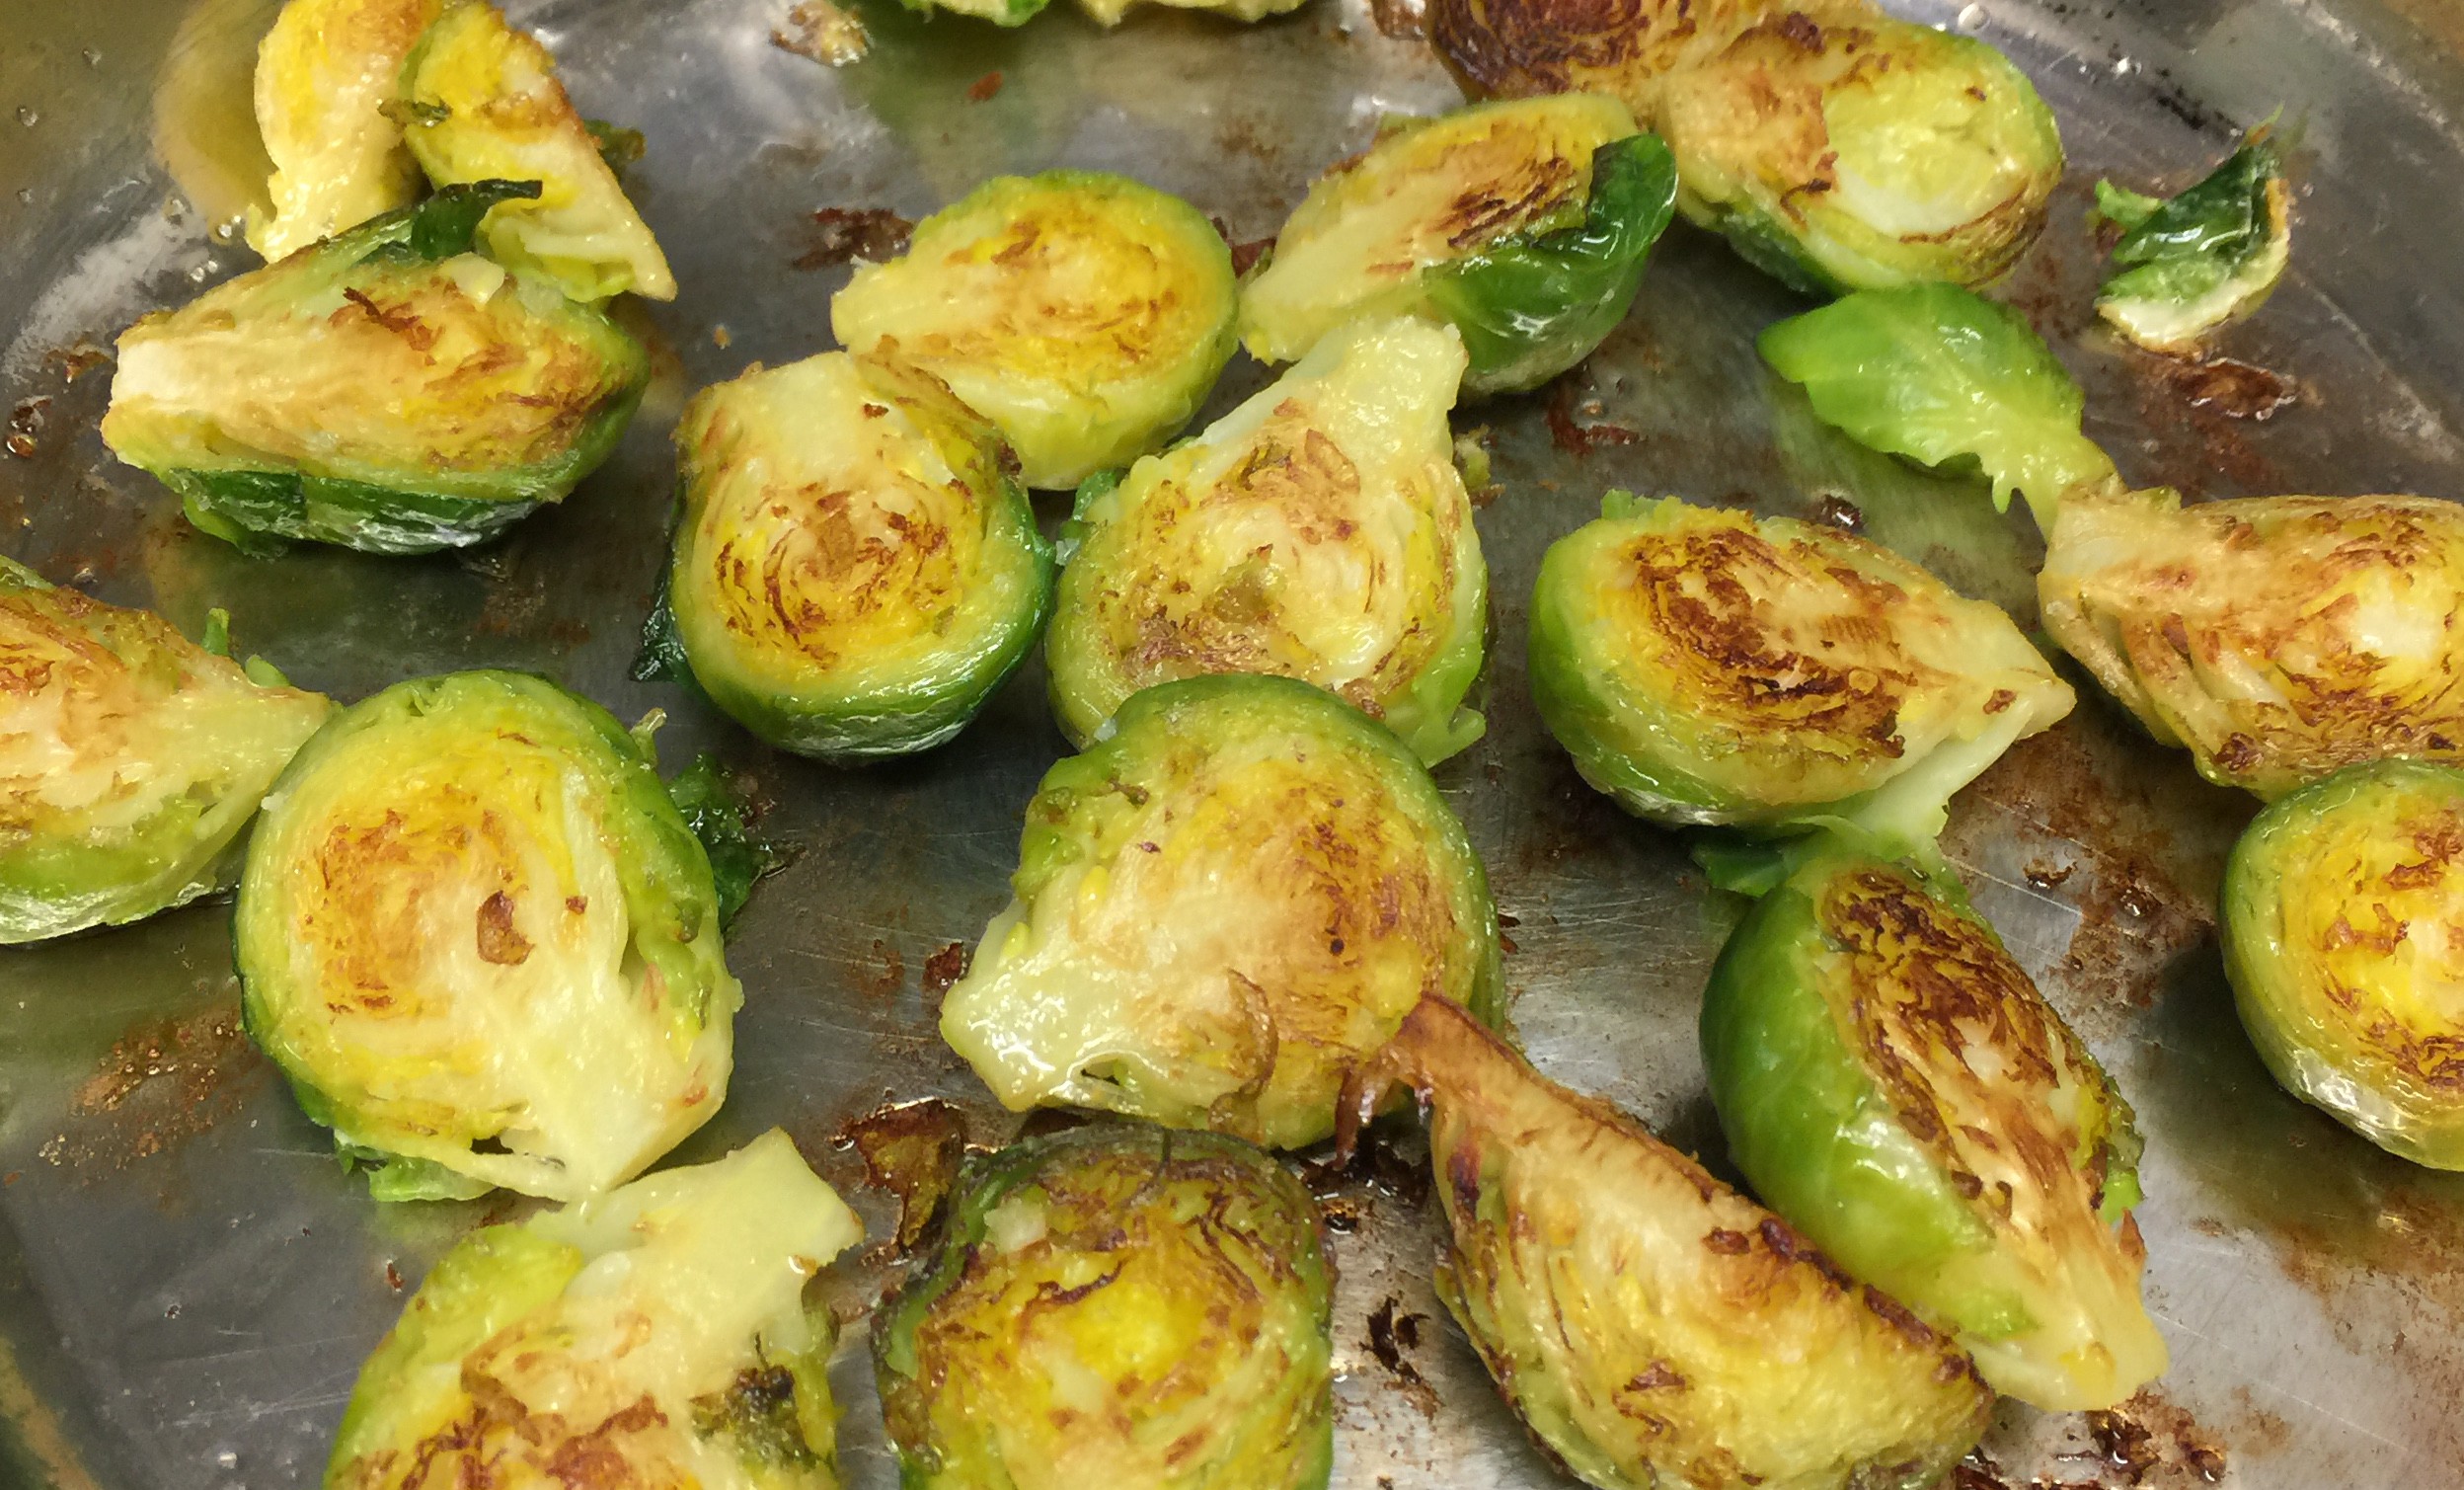 Pan Charred Brussels Sprouts